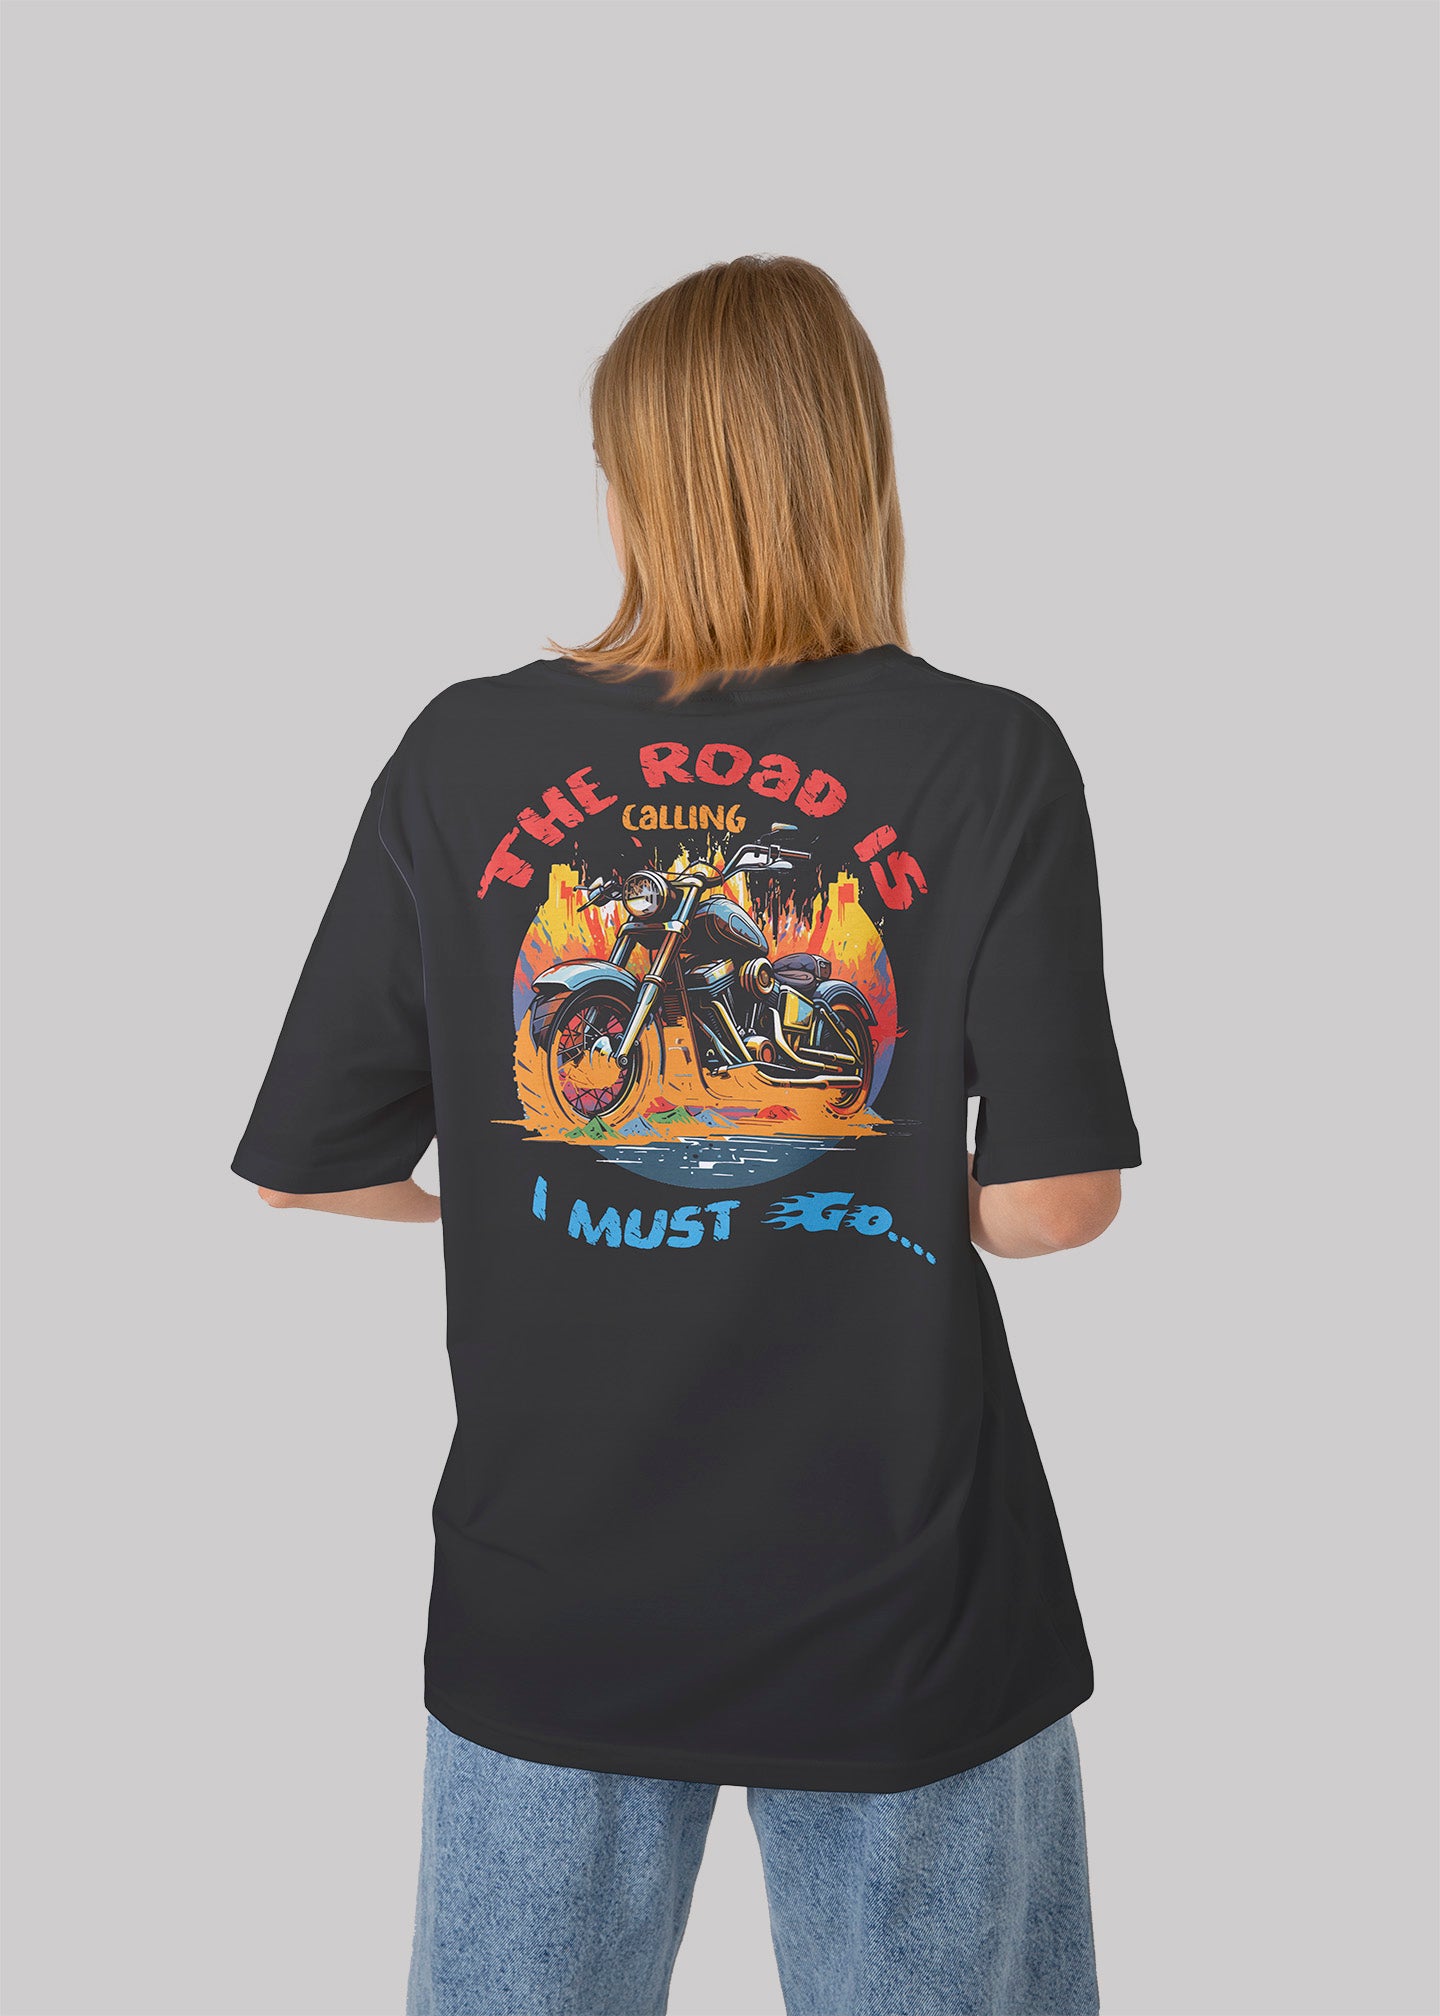 The road is calling, I must go Graphic Printed Oversized T-shirt